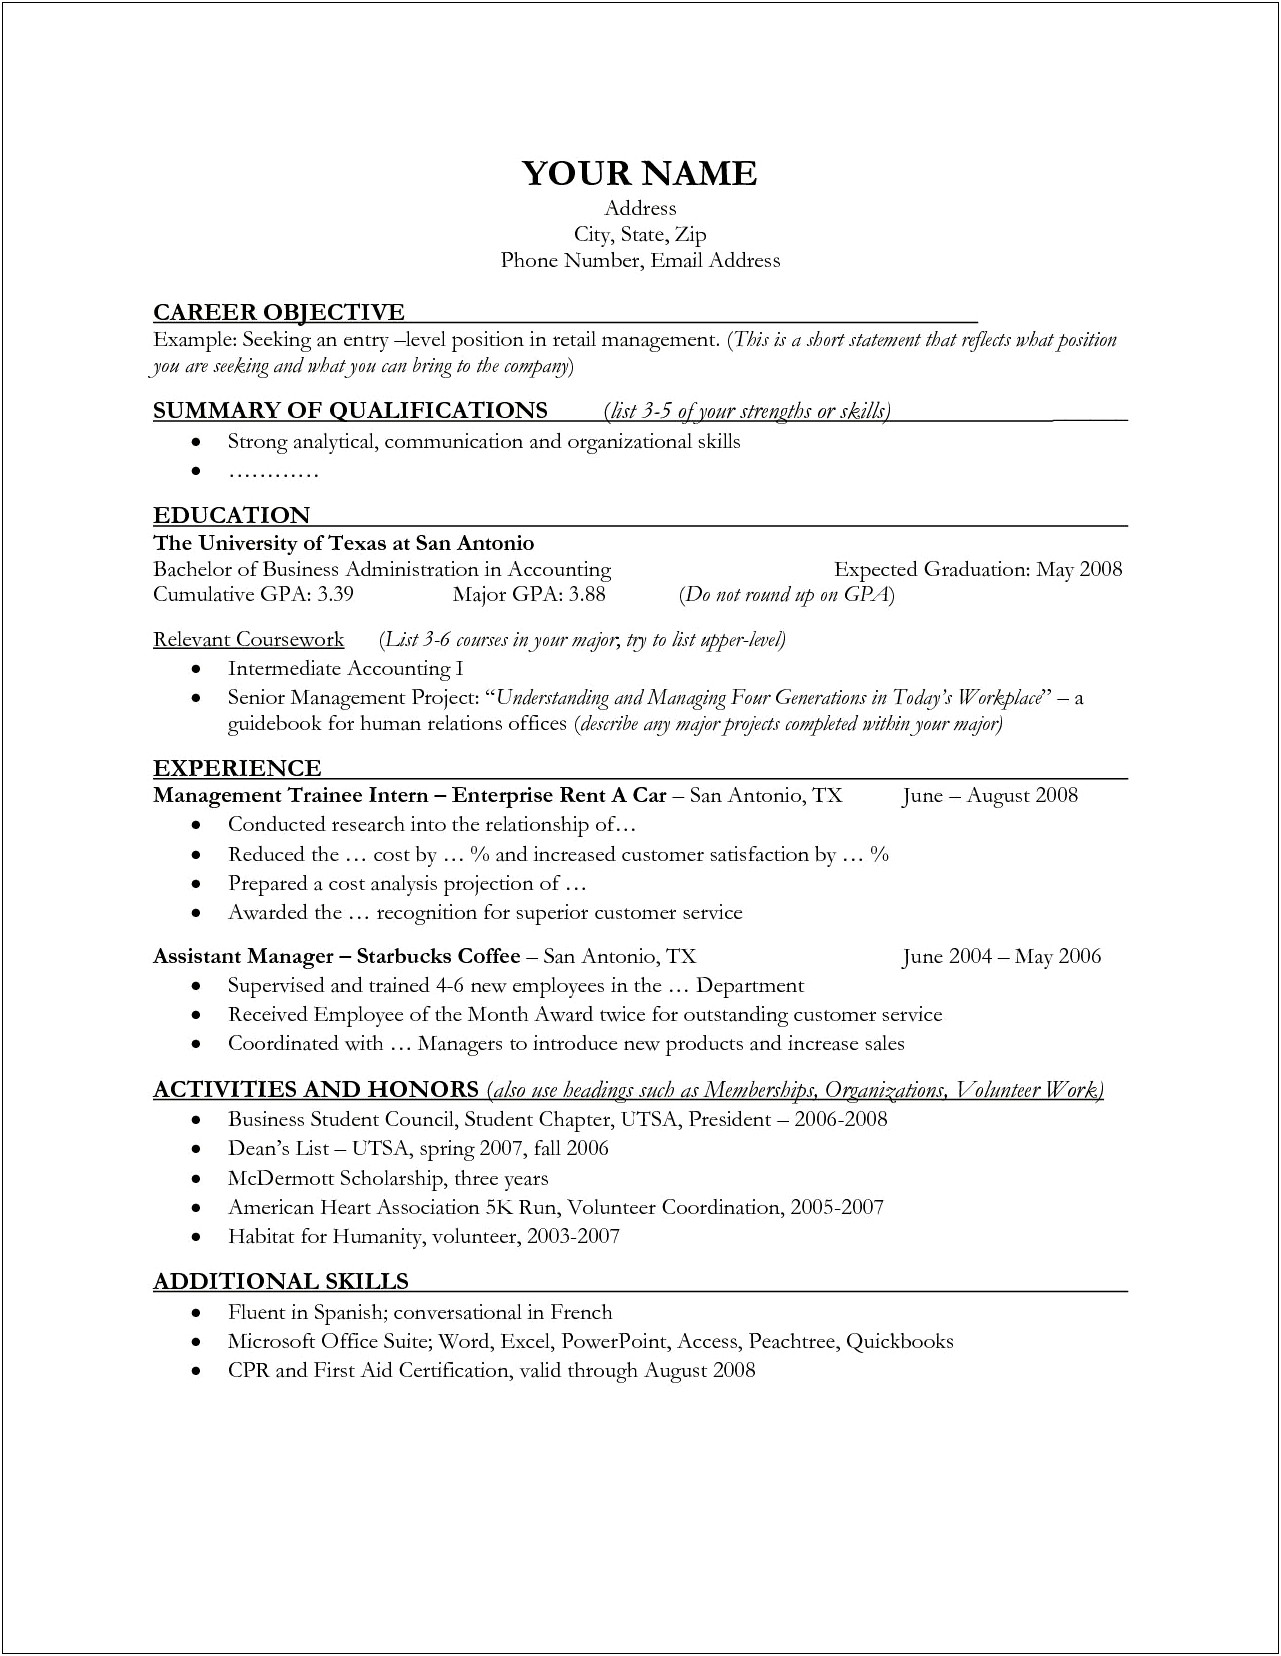 Resume Objective For Entry Level Positio